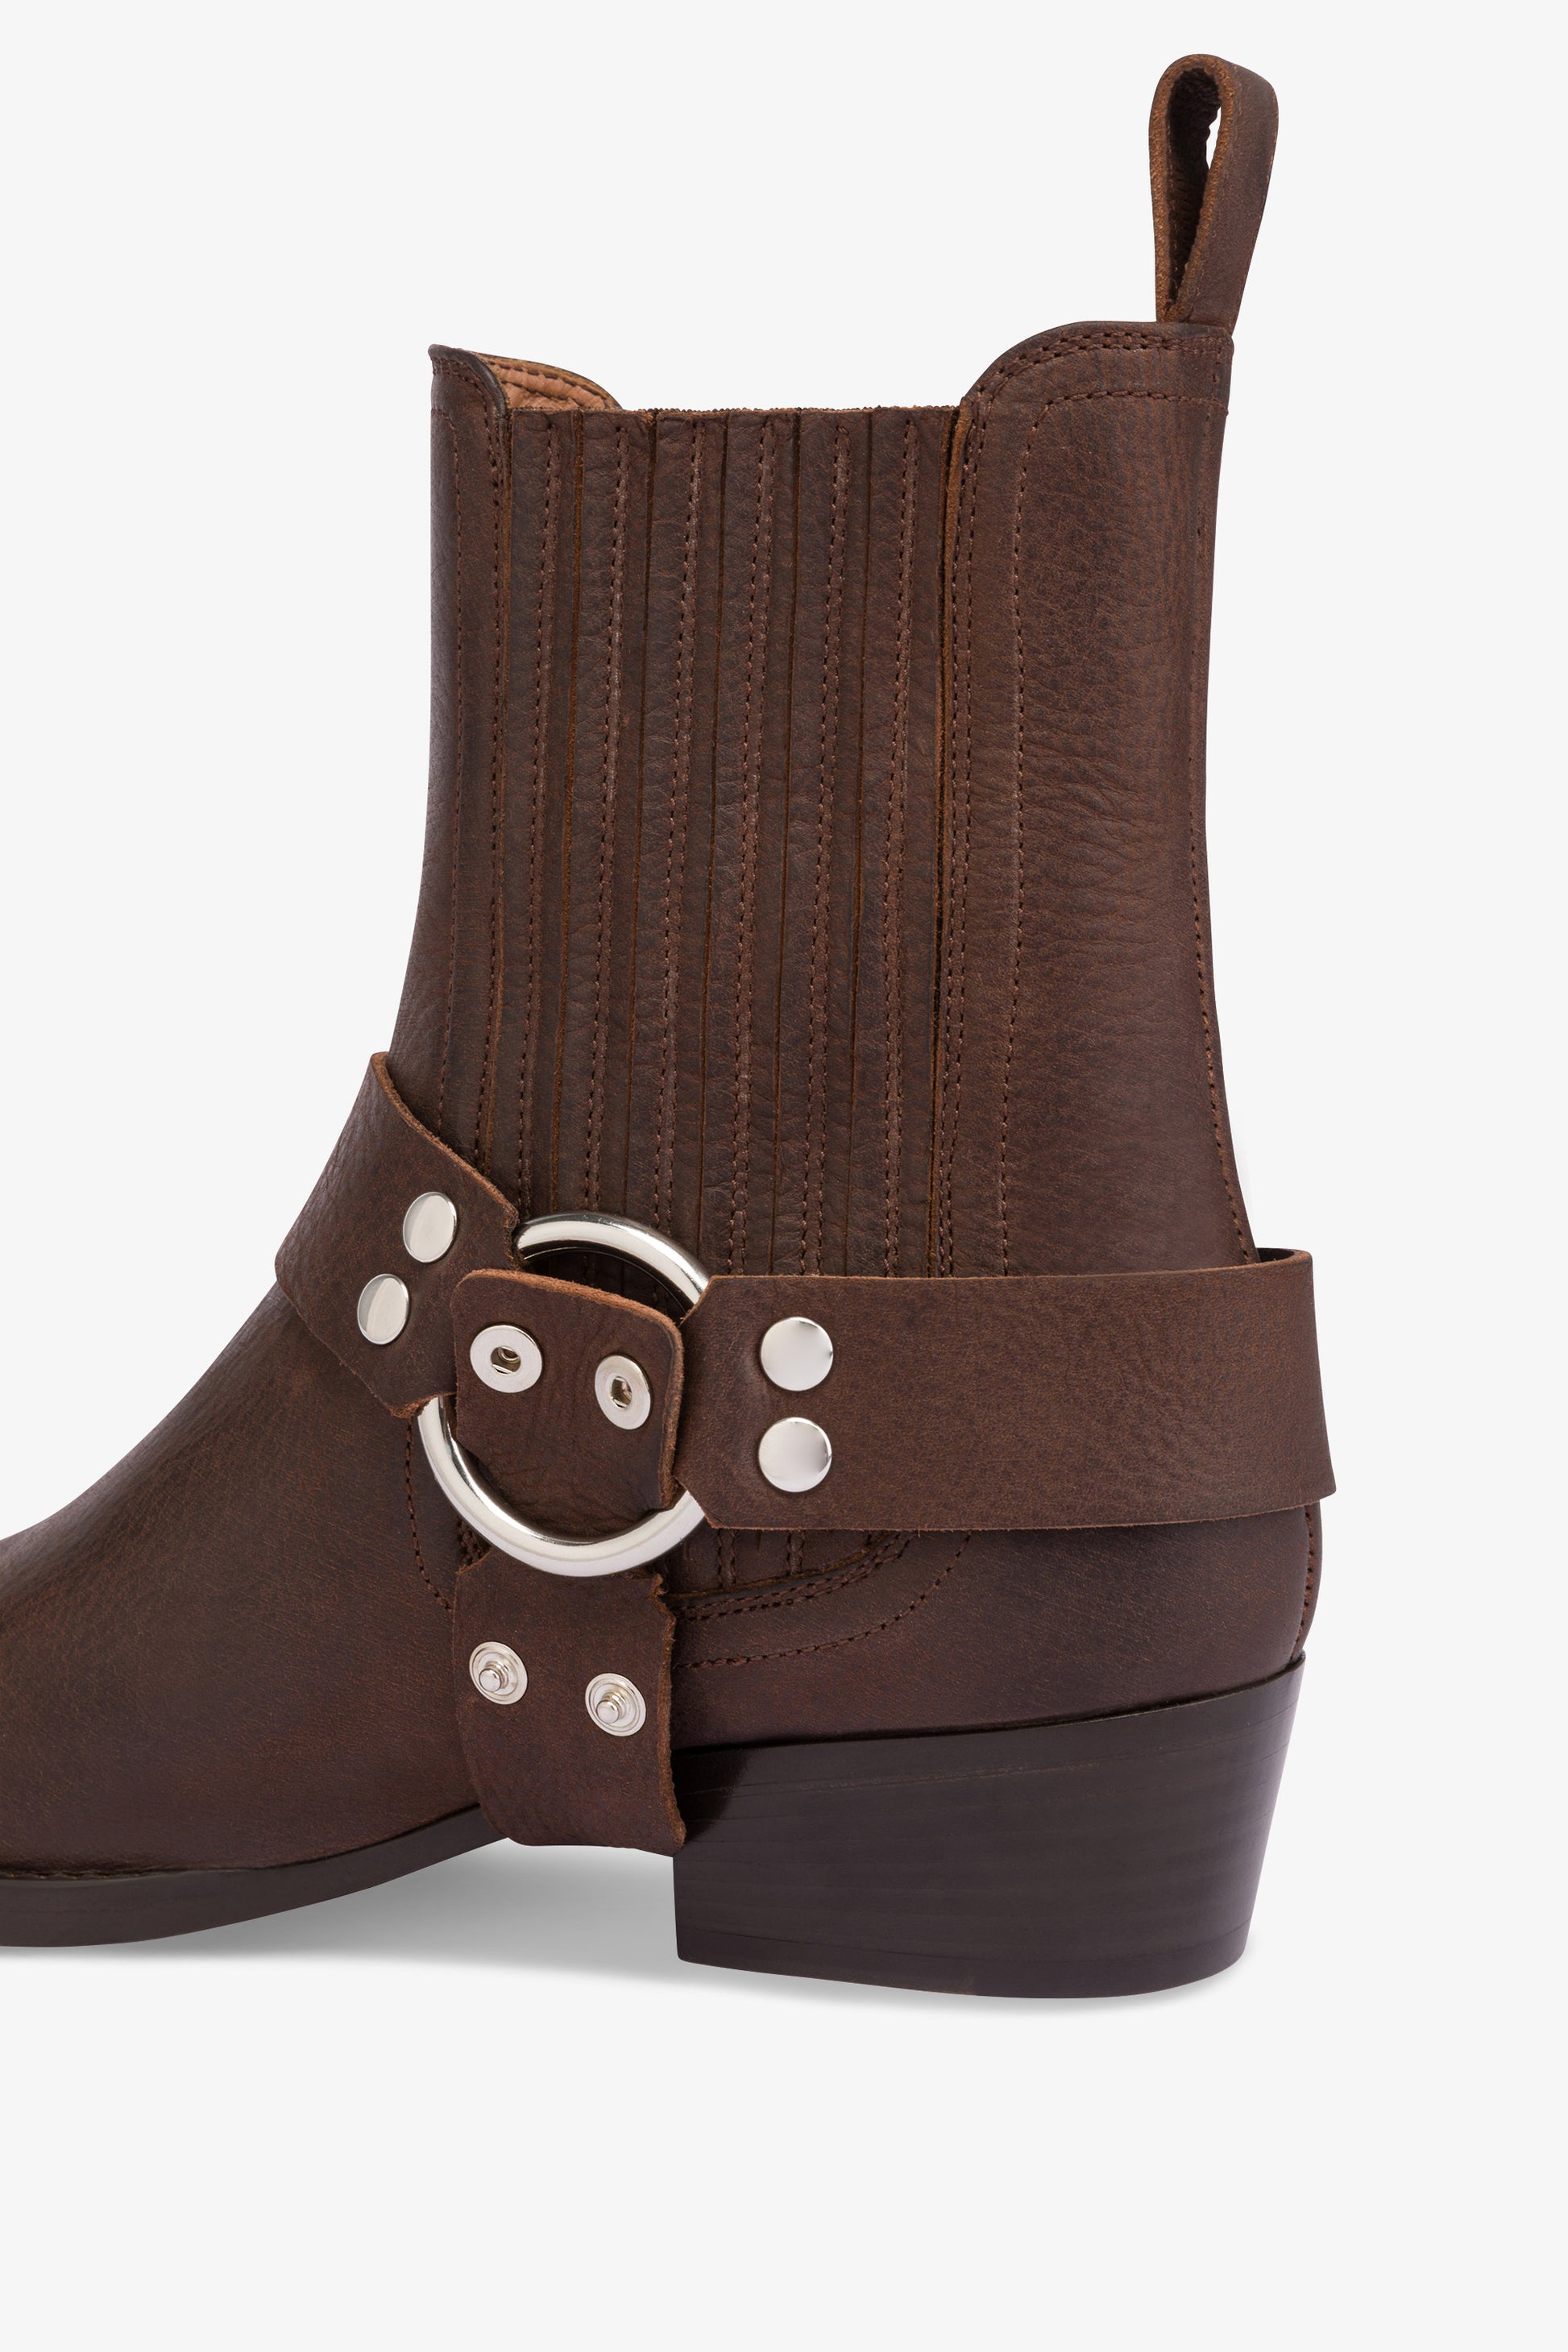 Rounded ankle boots in soft mulberry pebble leather